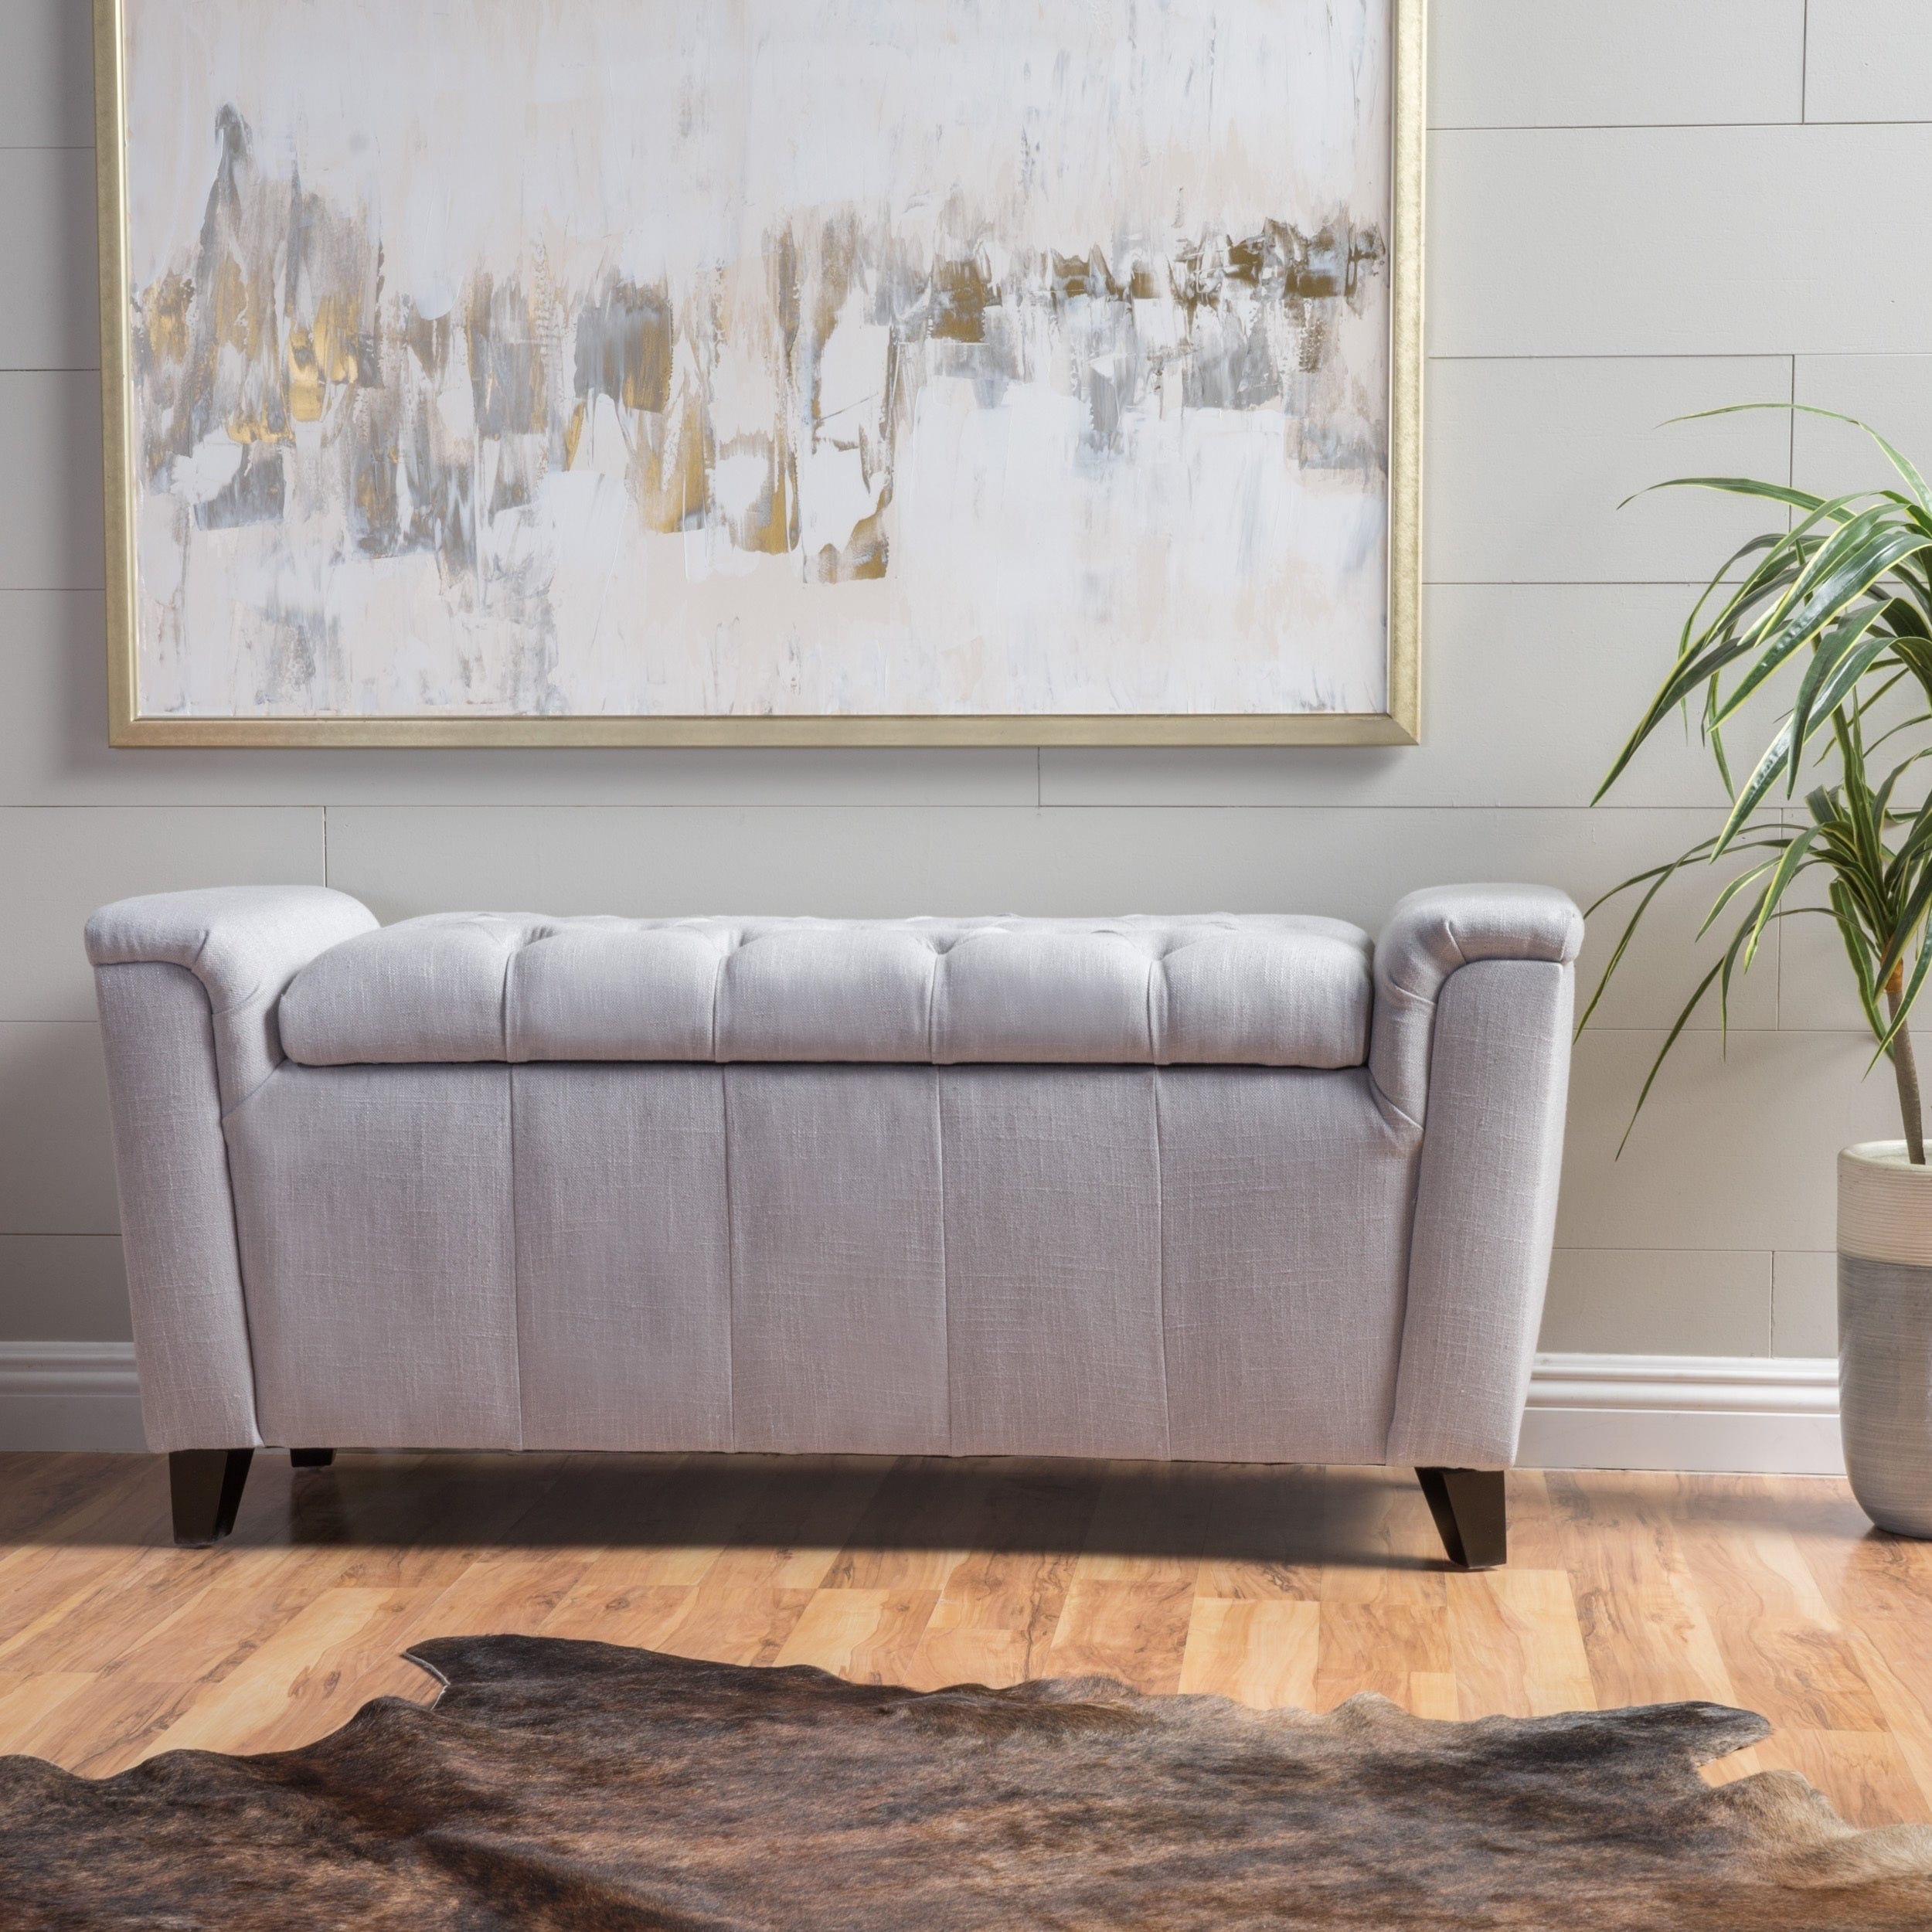 Argus Storage Ottoman Bench by Christopher Knight Home - Off-White